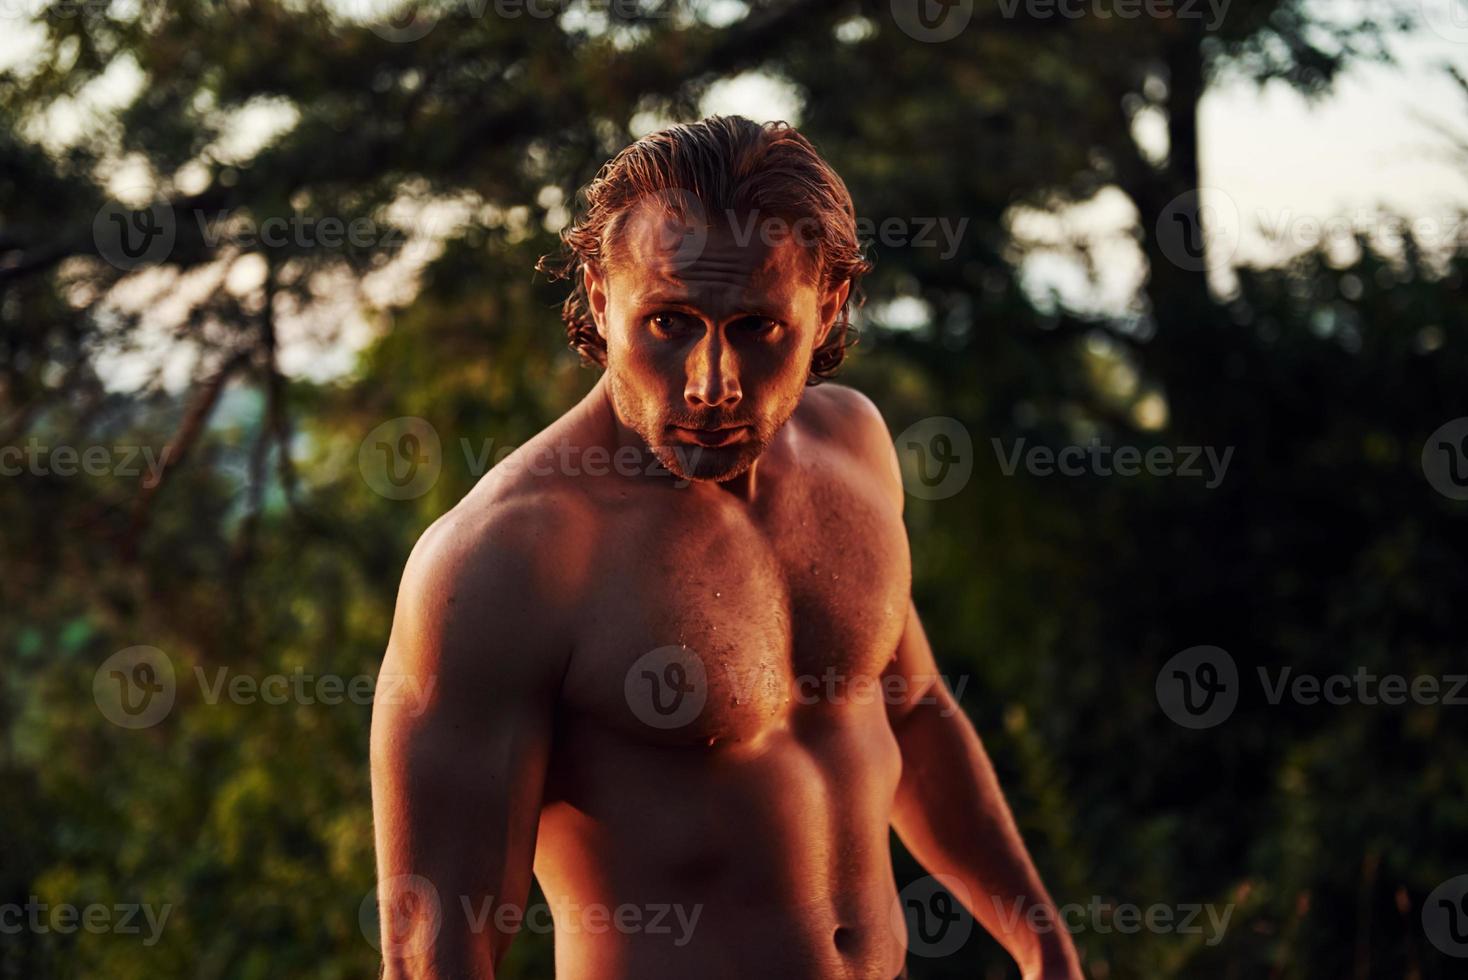 Handsome shirtless man with muscular body type is in the forest at daytime photo